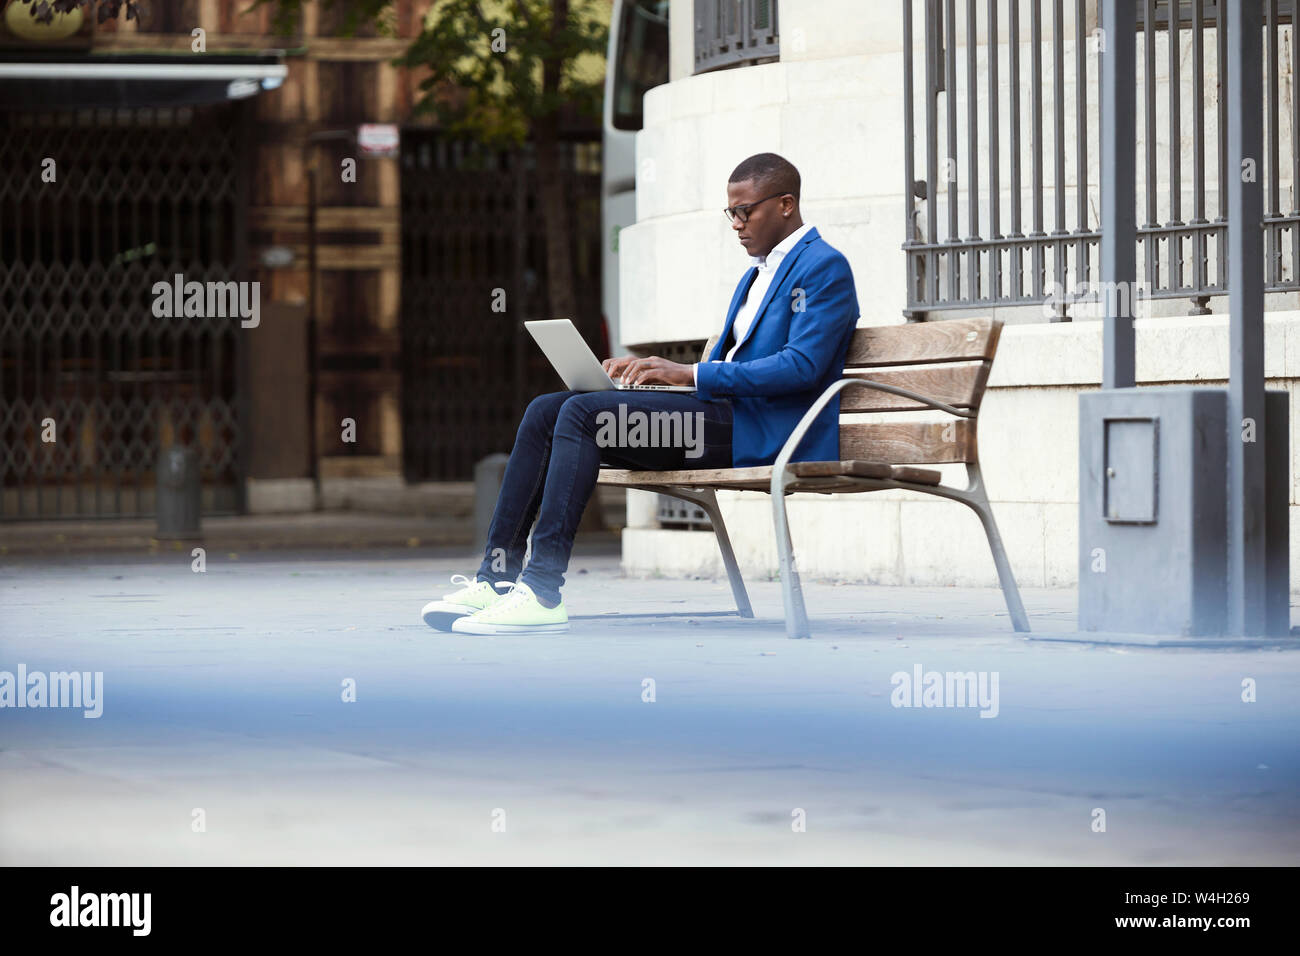 Young businessman wearing blue suit jacket sitting on bench and using laptop Stock Photo